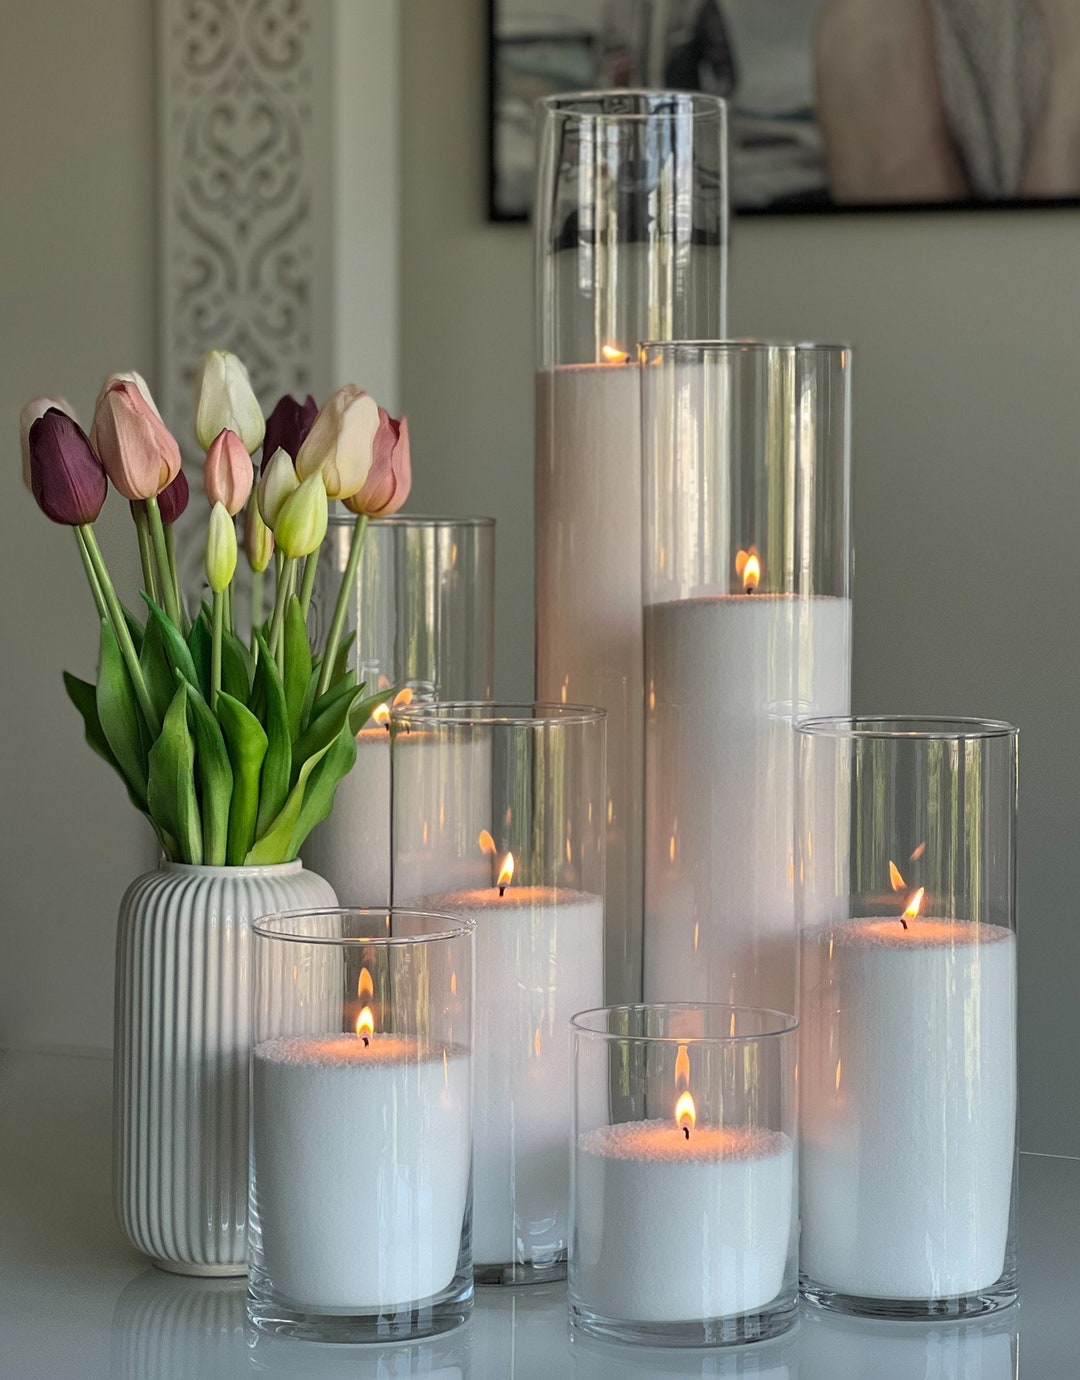 One common question people have about pearled candles is whether you c